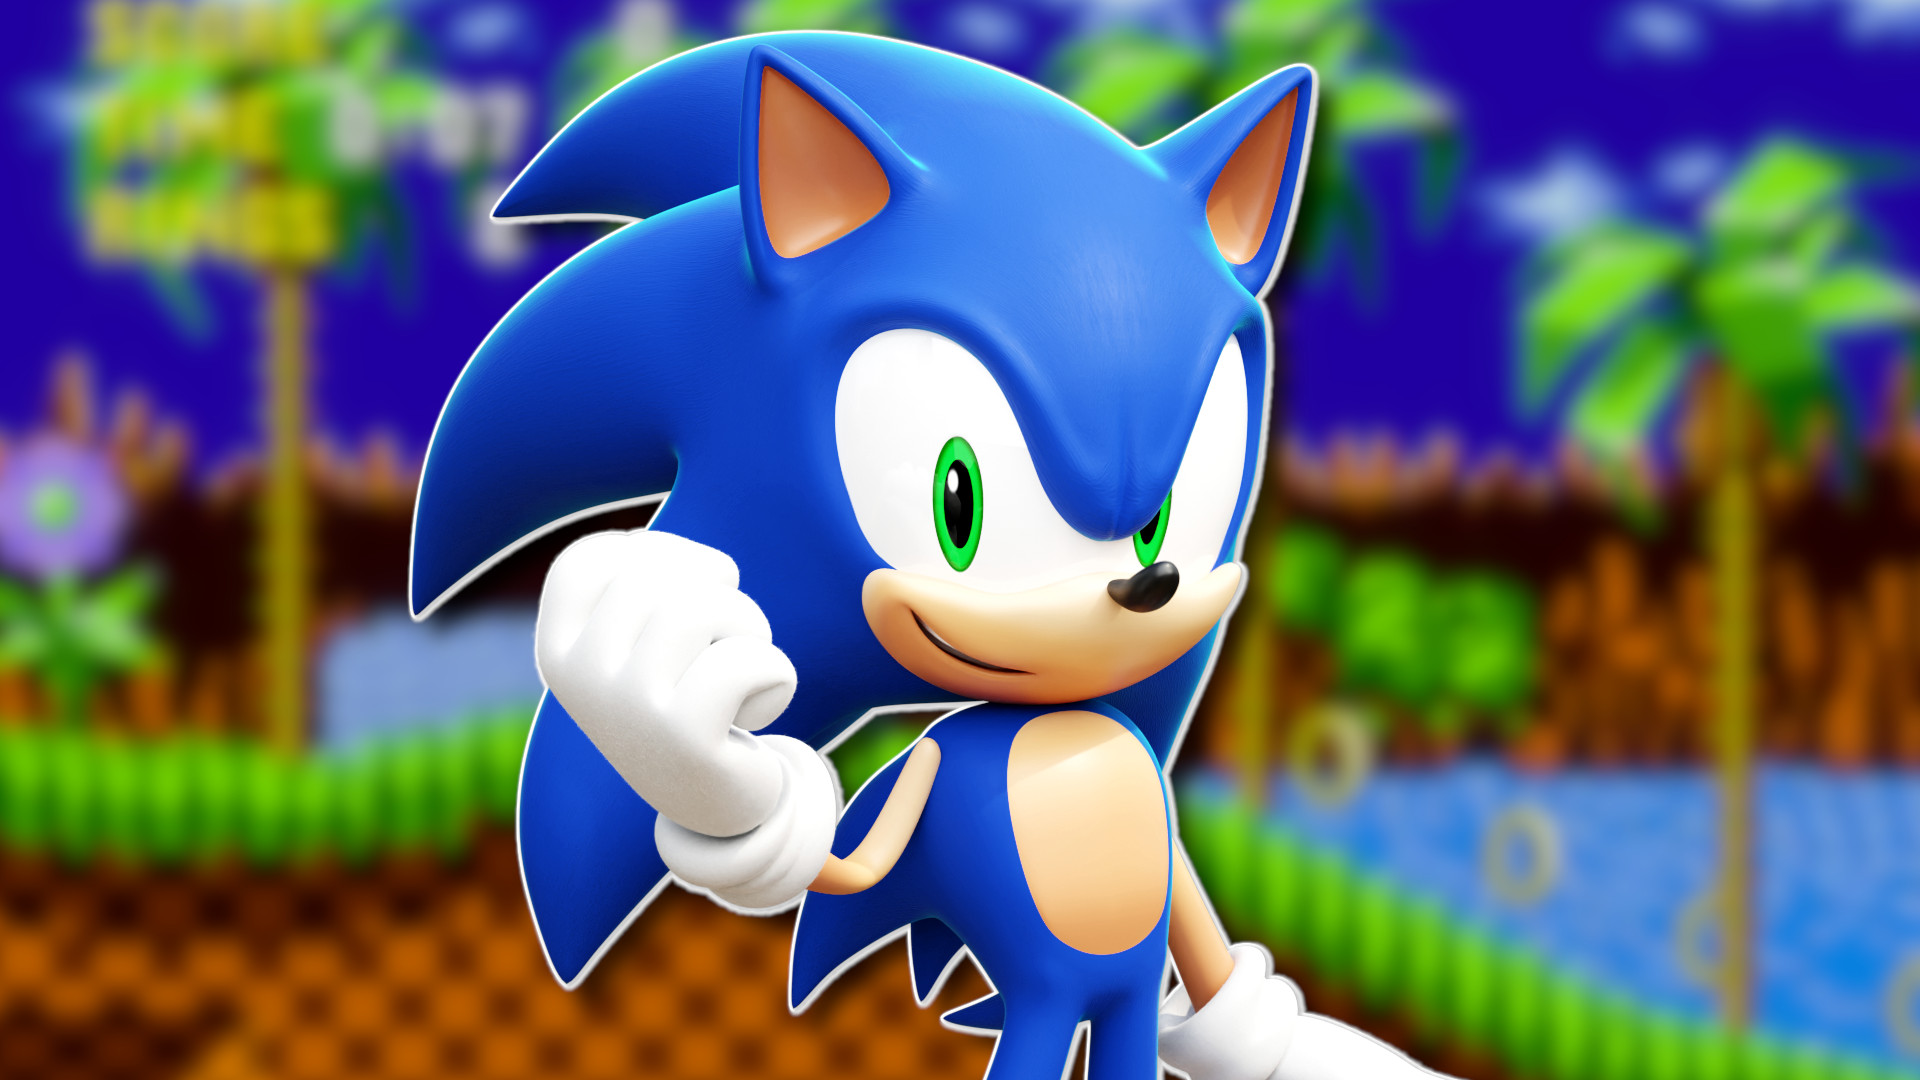 Sonic Games Play With Classic Sonic ! Games For Kids/Sonic Games Free 